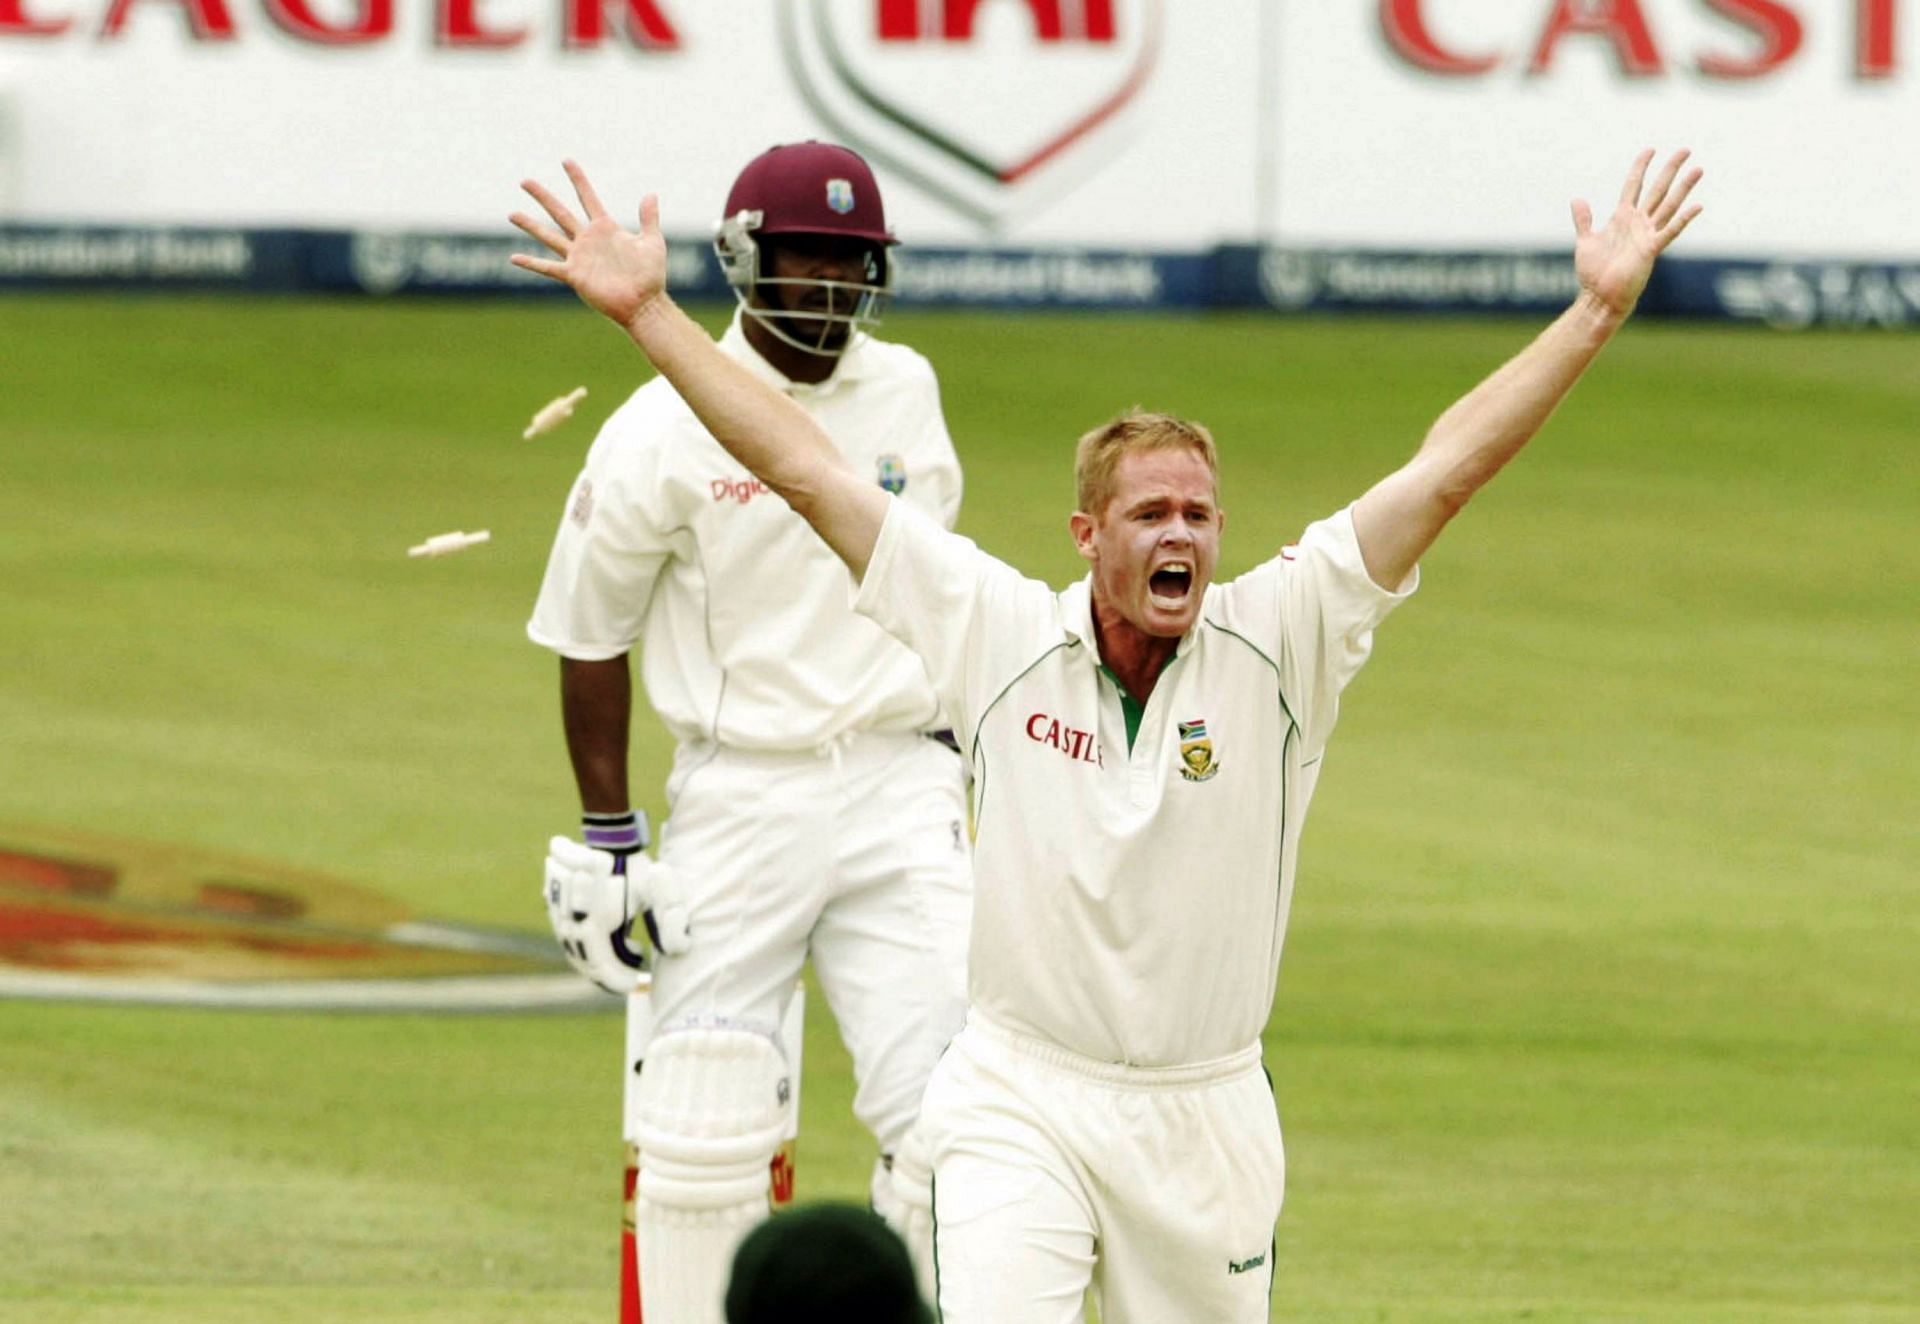 Shaun Pollock was the first cricketer to achieve the 3,000 run/300 wicket double in both Test and ODI cricket.